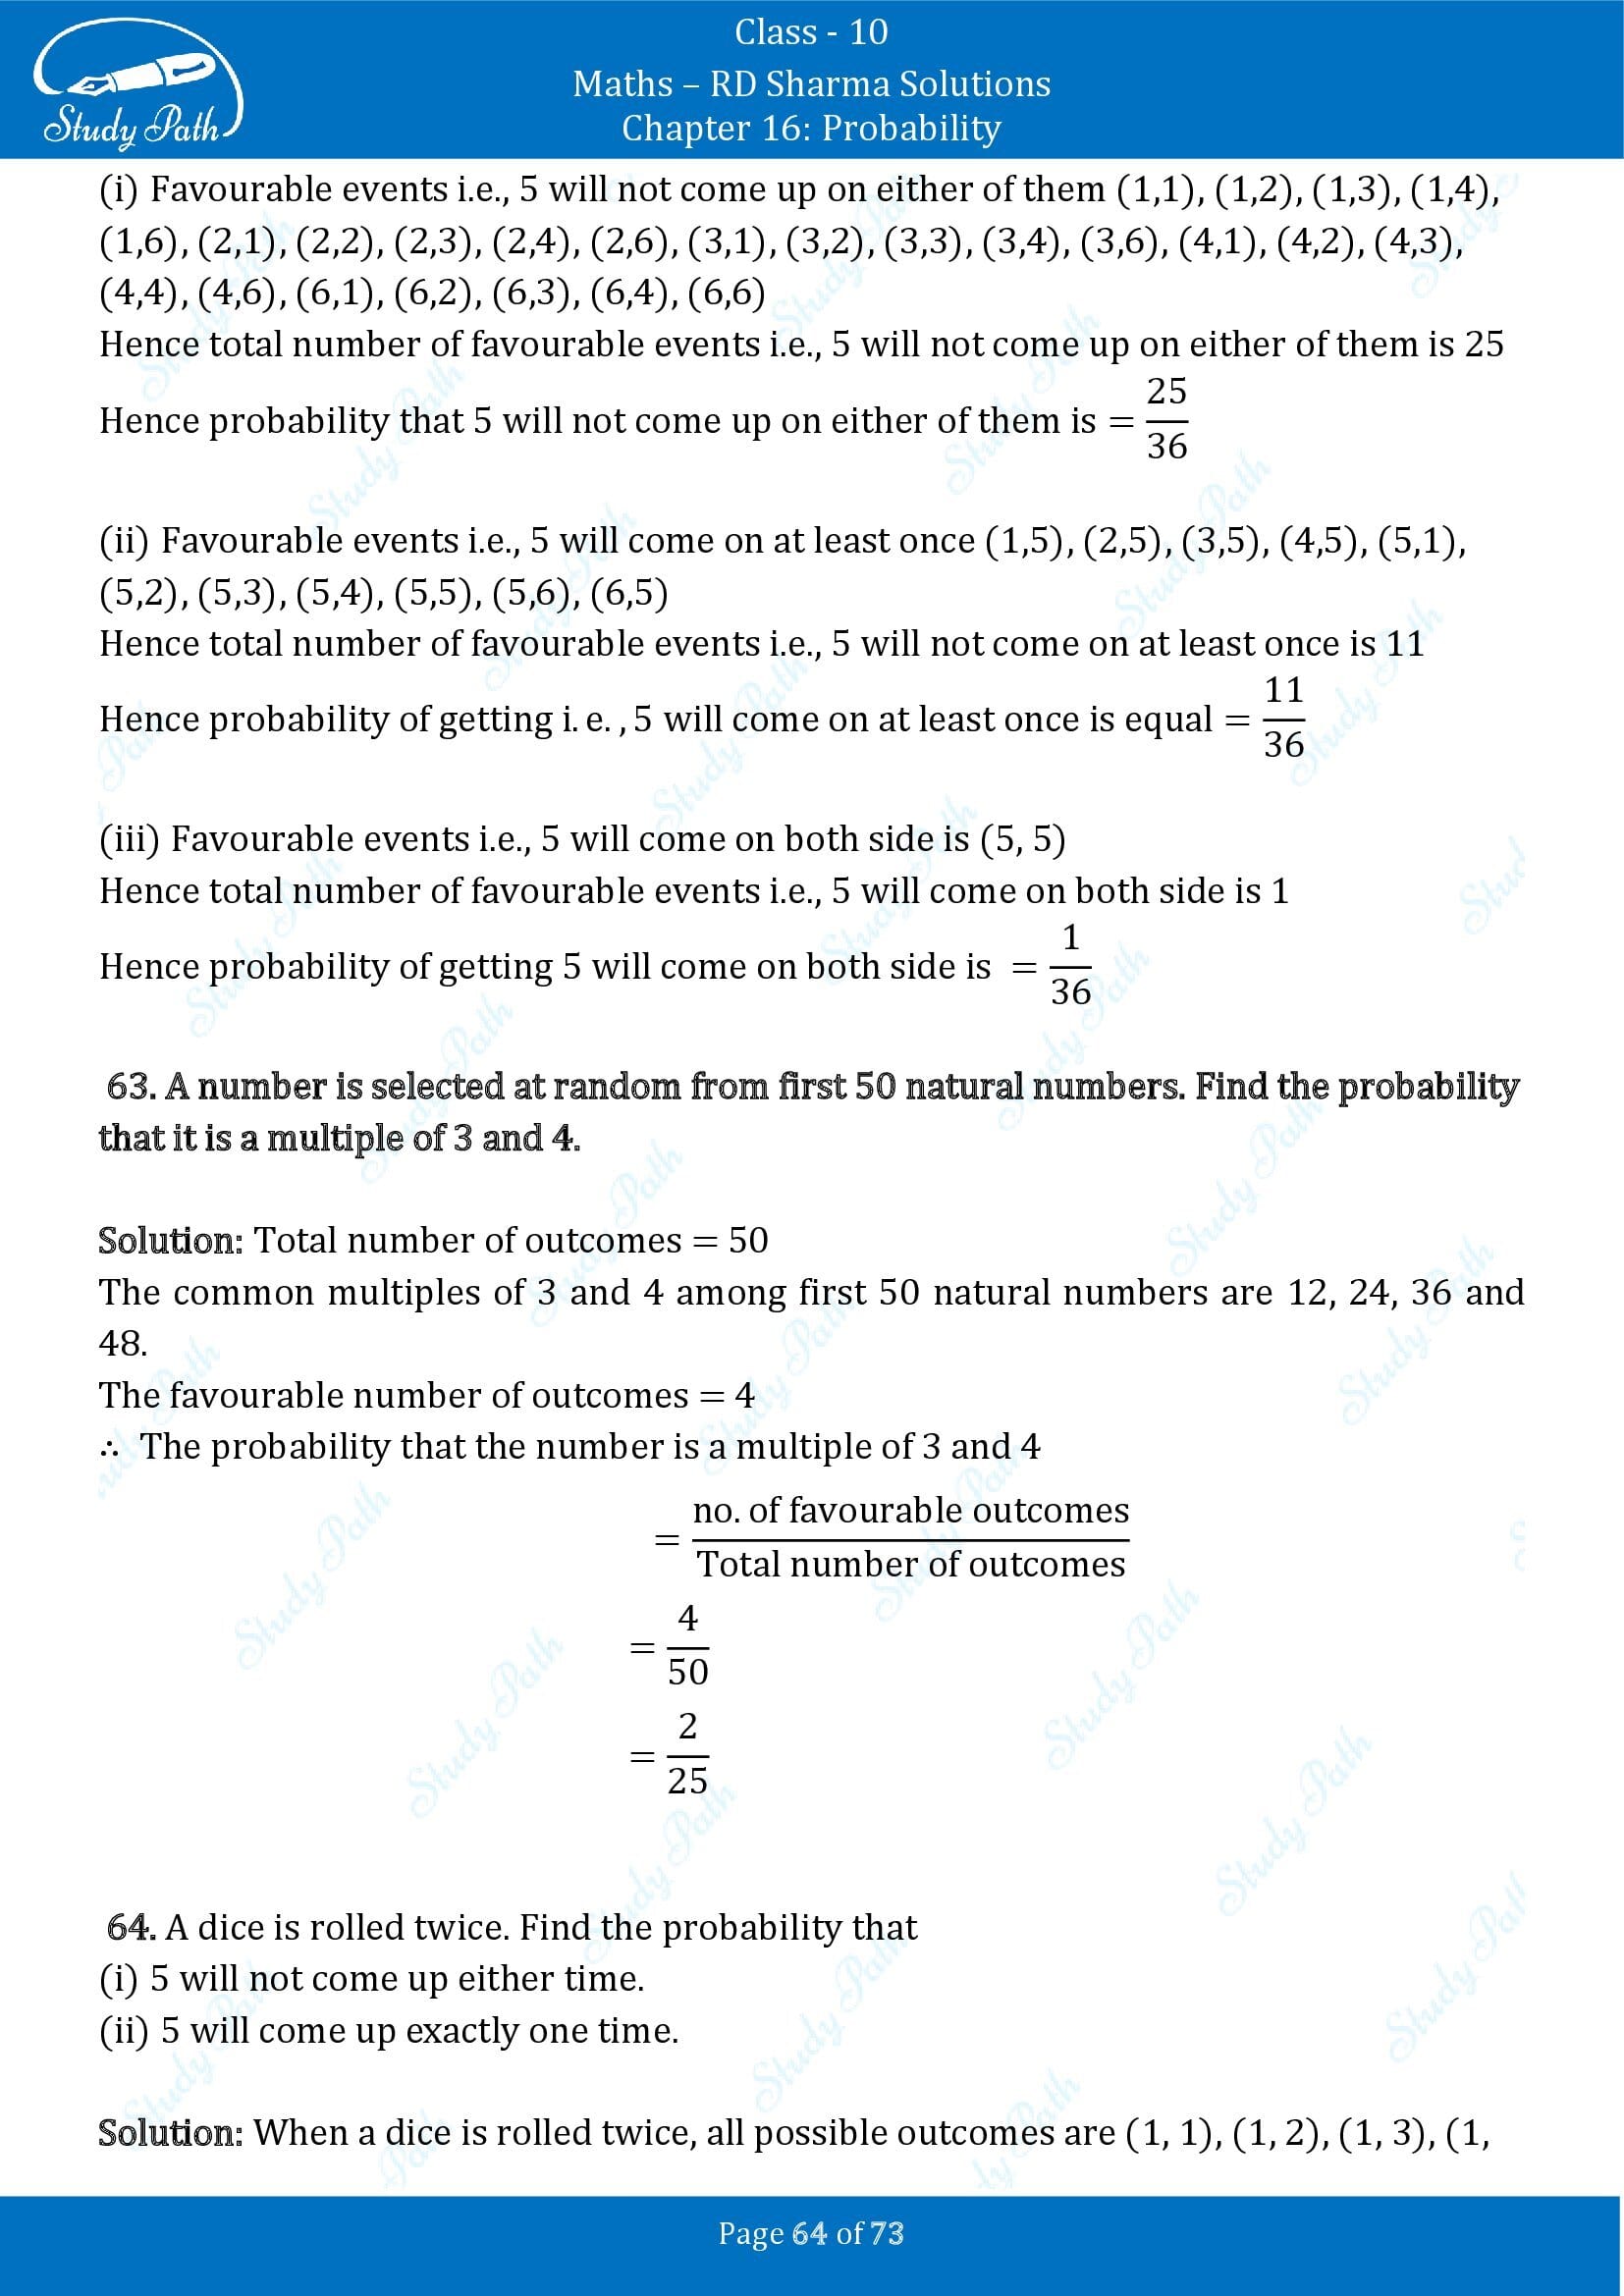 RD Sharma Solutions Class 10 Chapter 16 Probability Exercise 16.1 00064